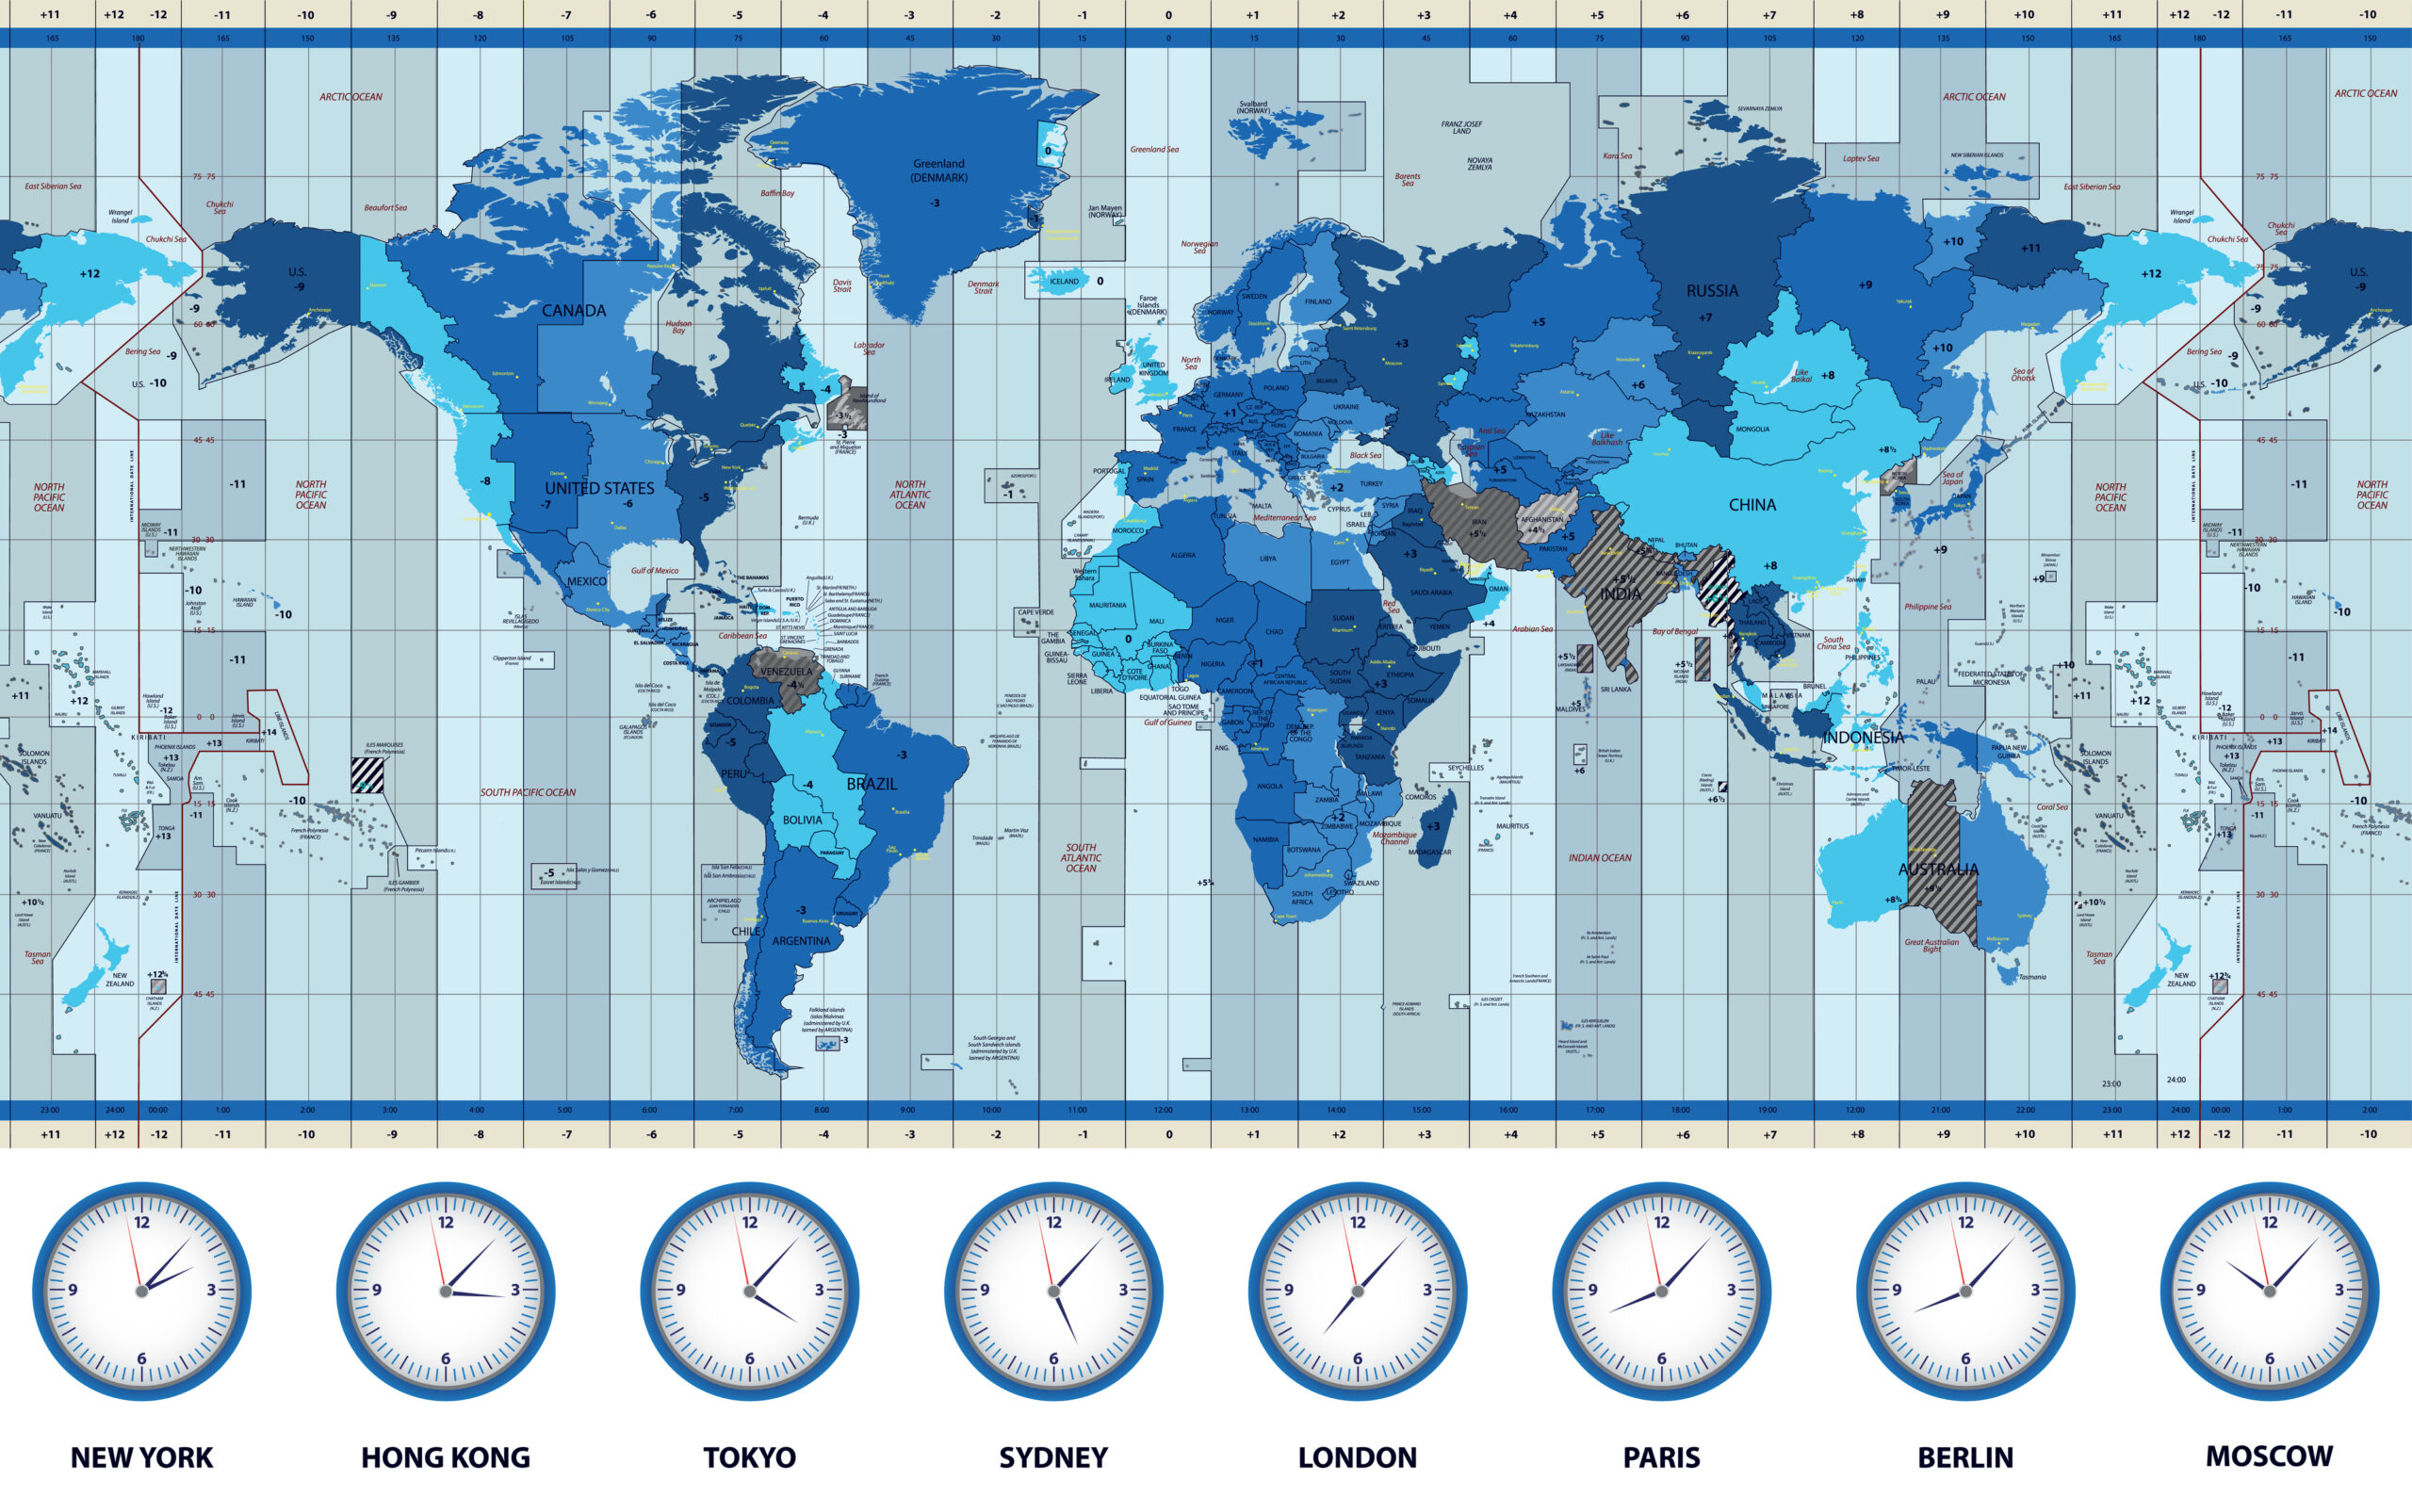 Map of the world standard time zones in blue colors